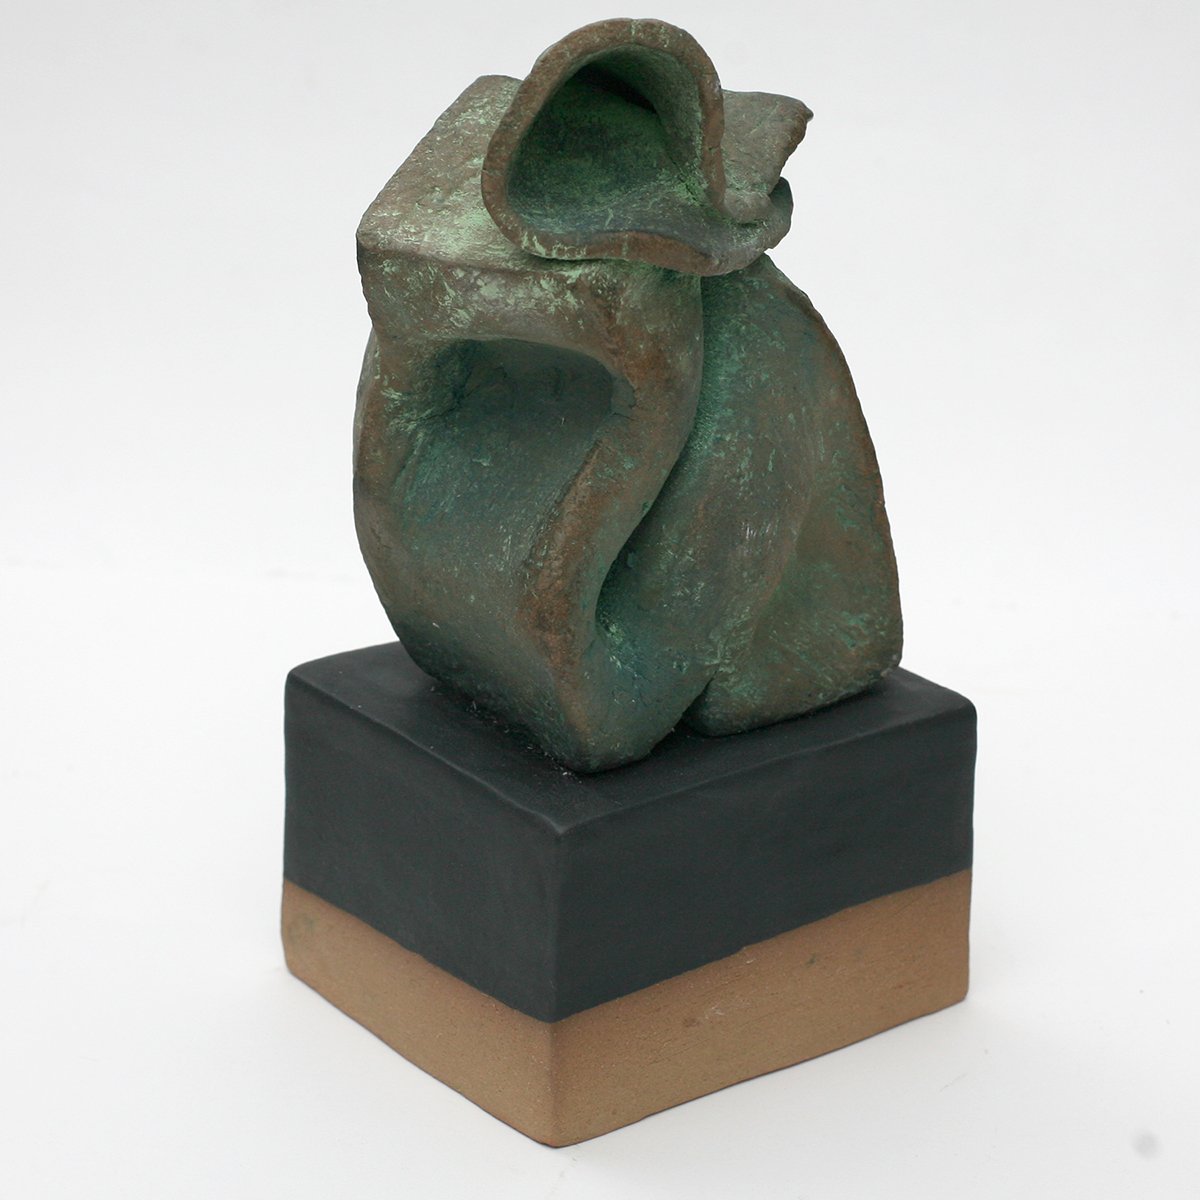 Learning from Hepworth